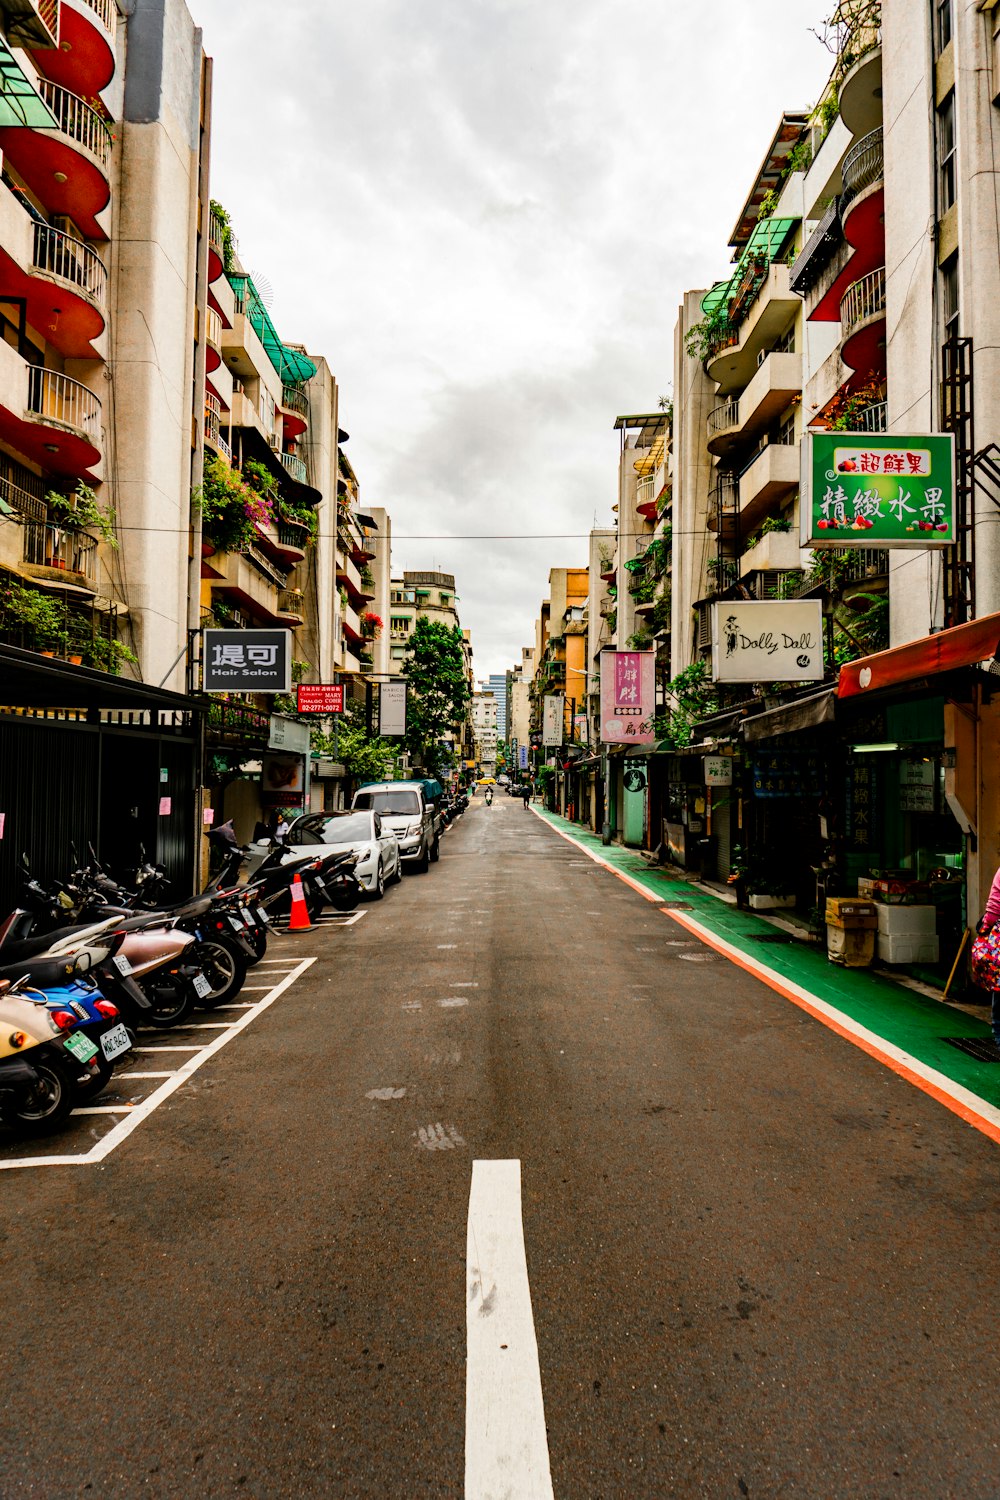 a street lined with parked motorcycles next to tall buildings